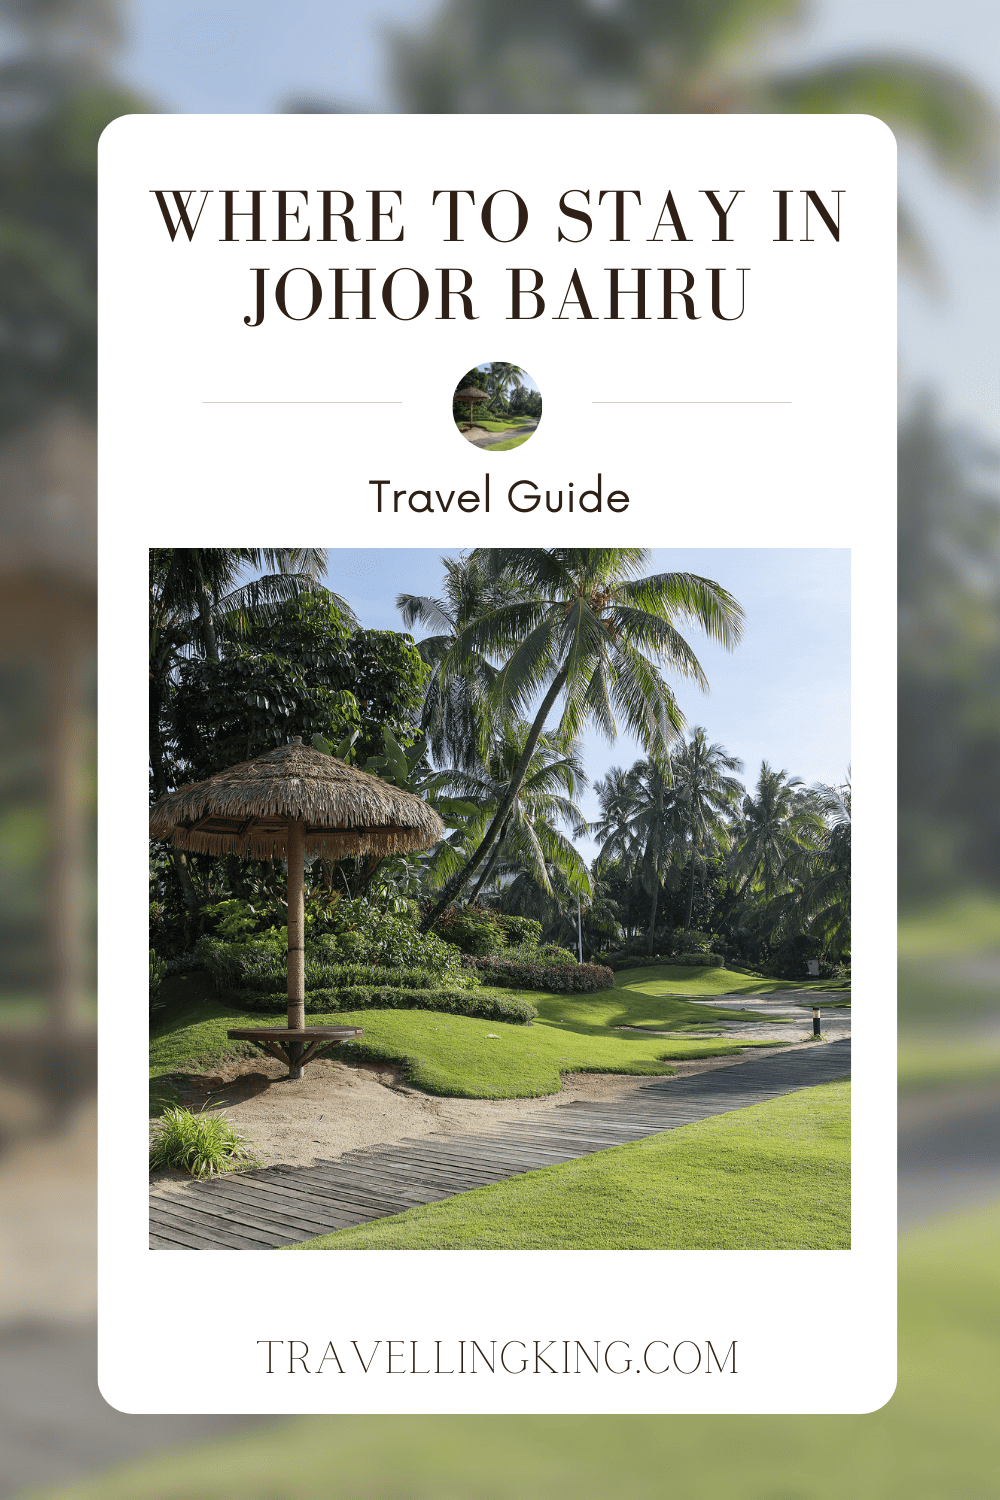 Where to stay in Johor Bahru